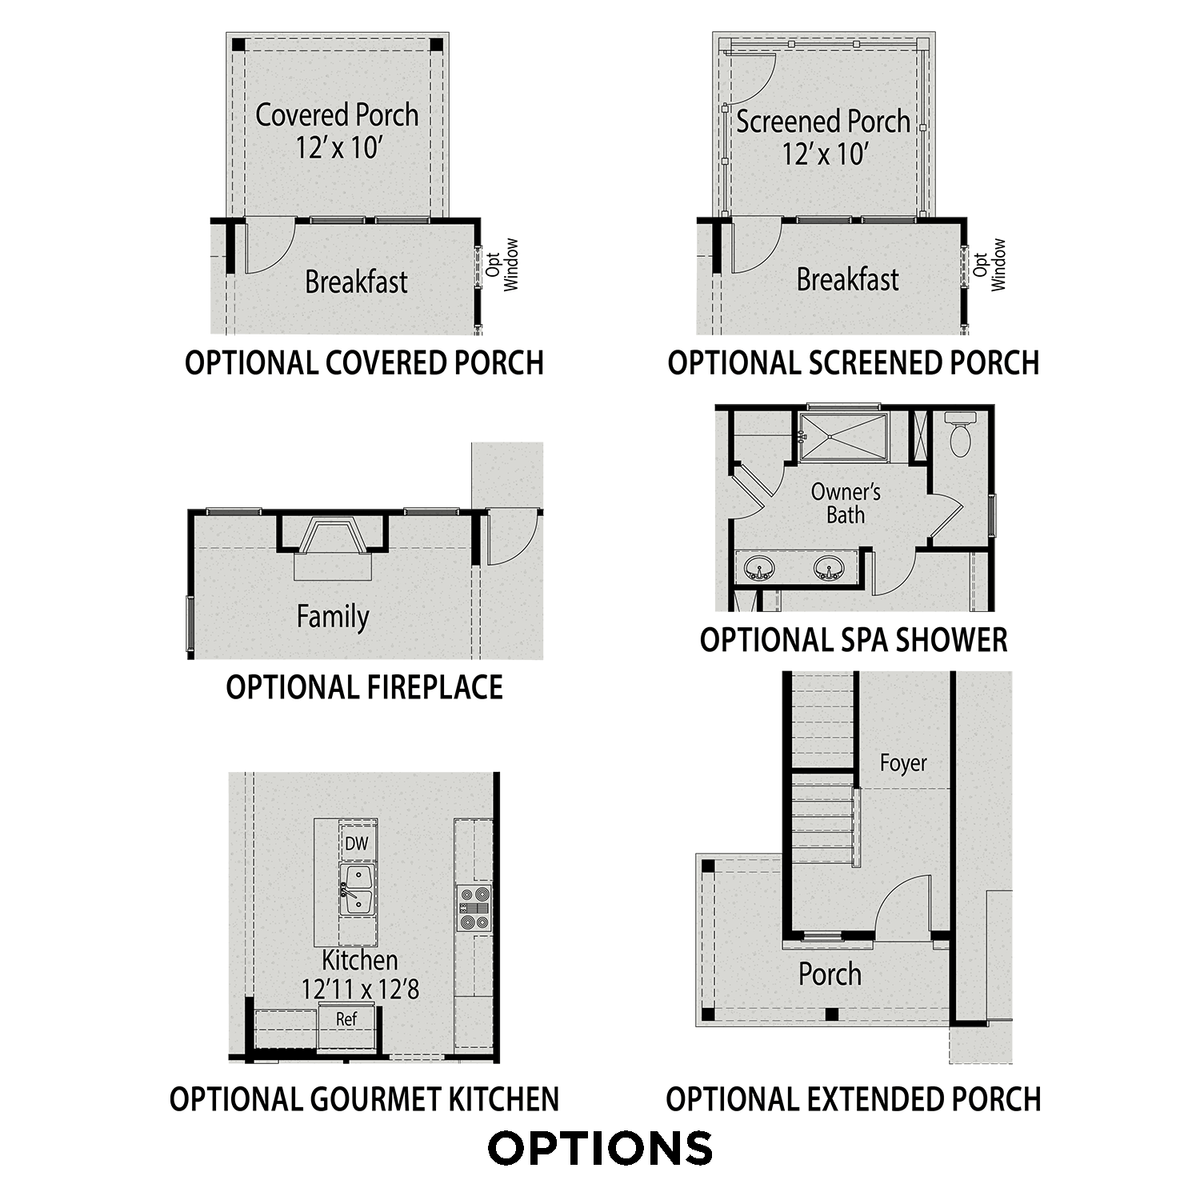 3 - The Gavin A buildable floor plan layout in Davidson Homes' Gregory Village community.